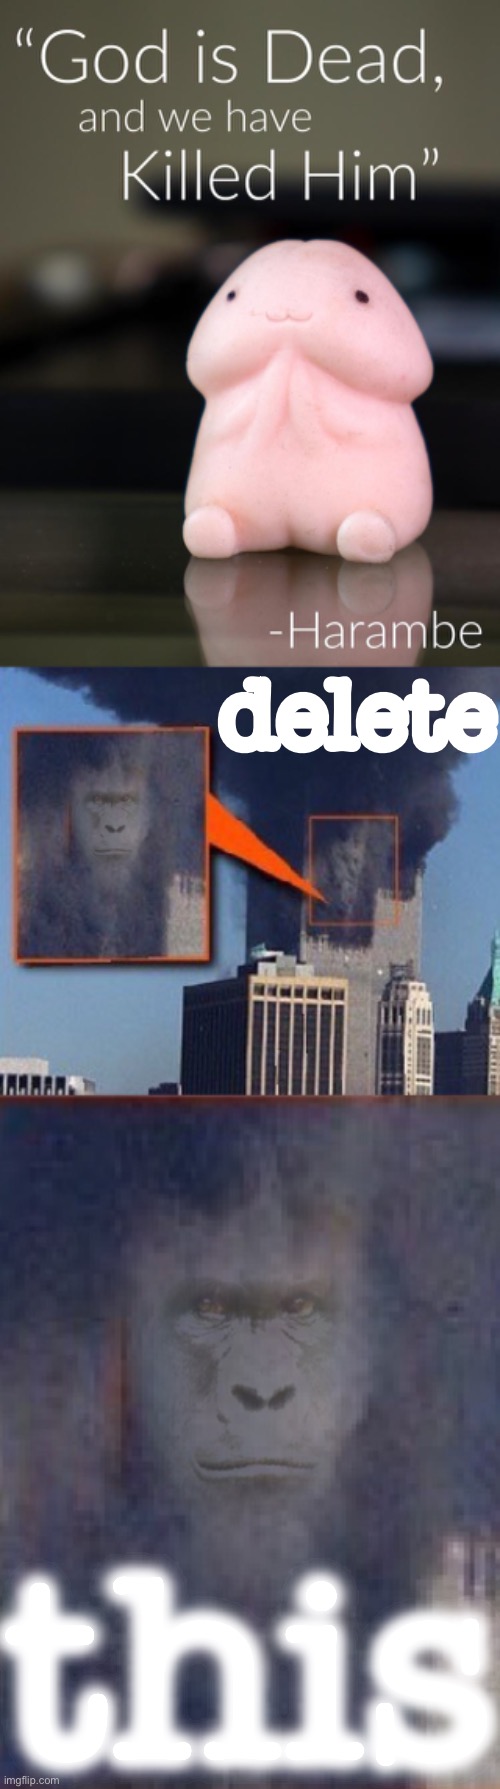 lord harambe help me to unsee | delete; this | image tagged in harambe bush 9/11 towers,god is dead and we have killed him harambe,delete this,delete,can't unsee,no | made w/ Imgflip meme maker